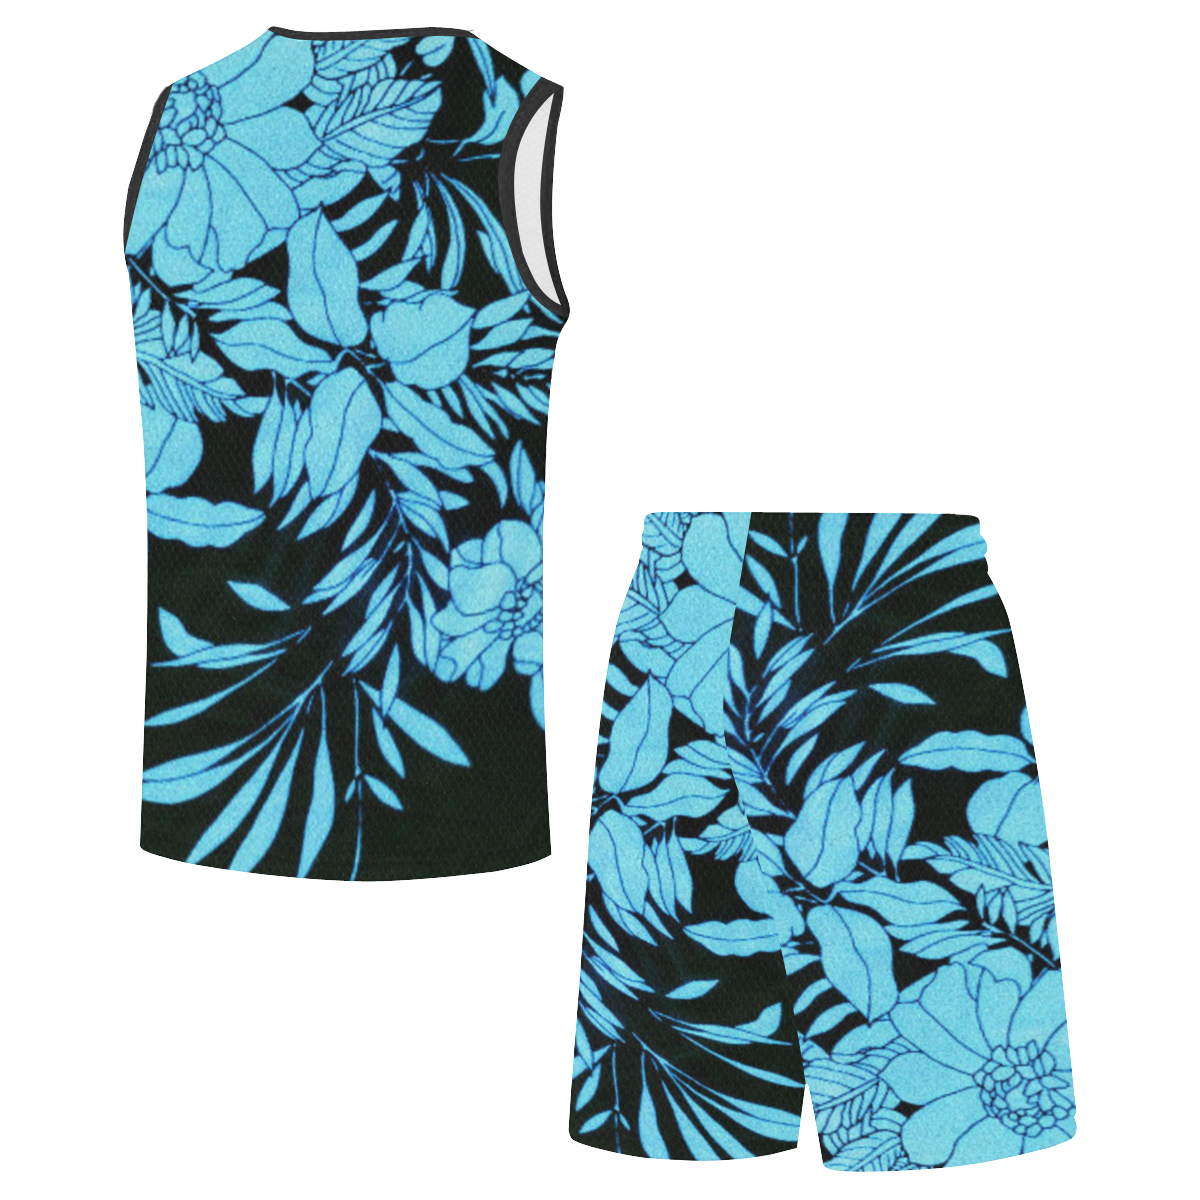 blue floral watercolor All Over Print Basketball Uniform